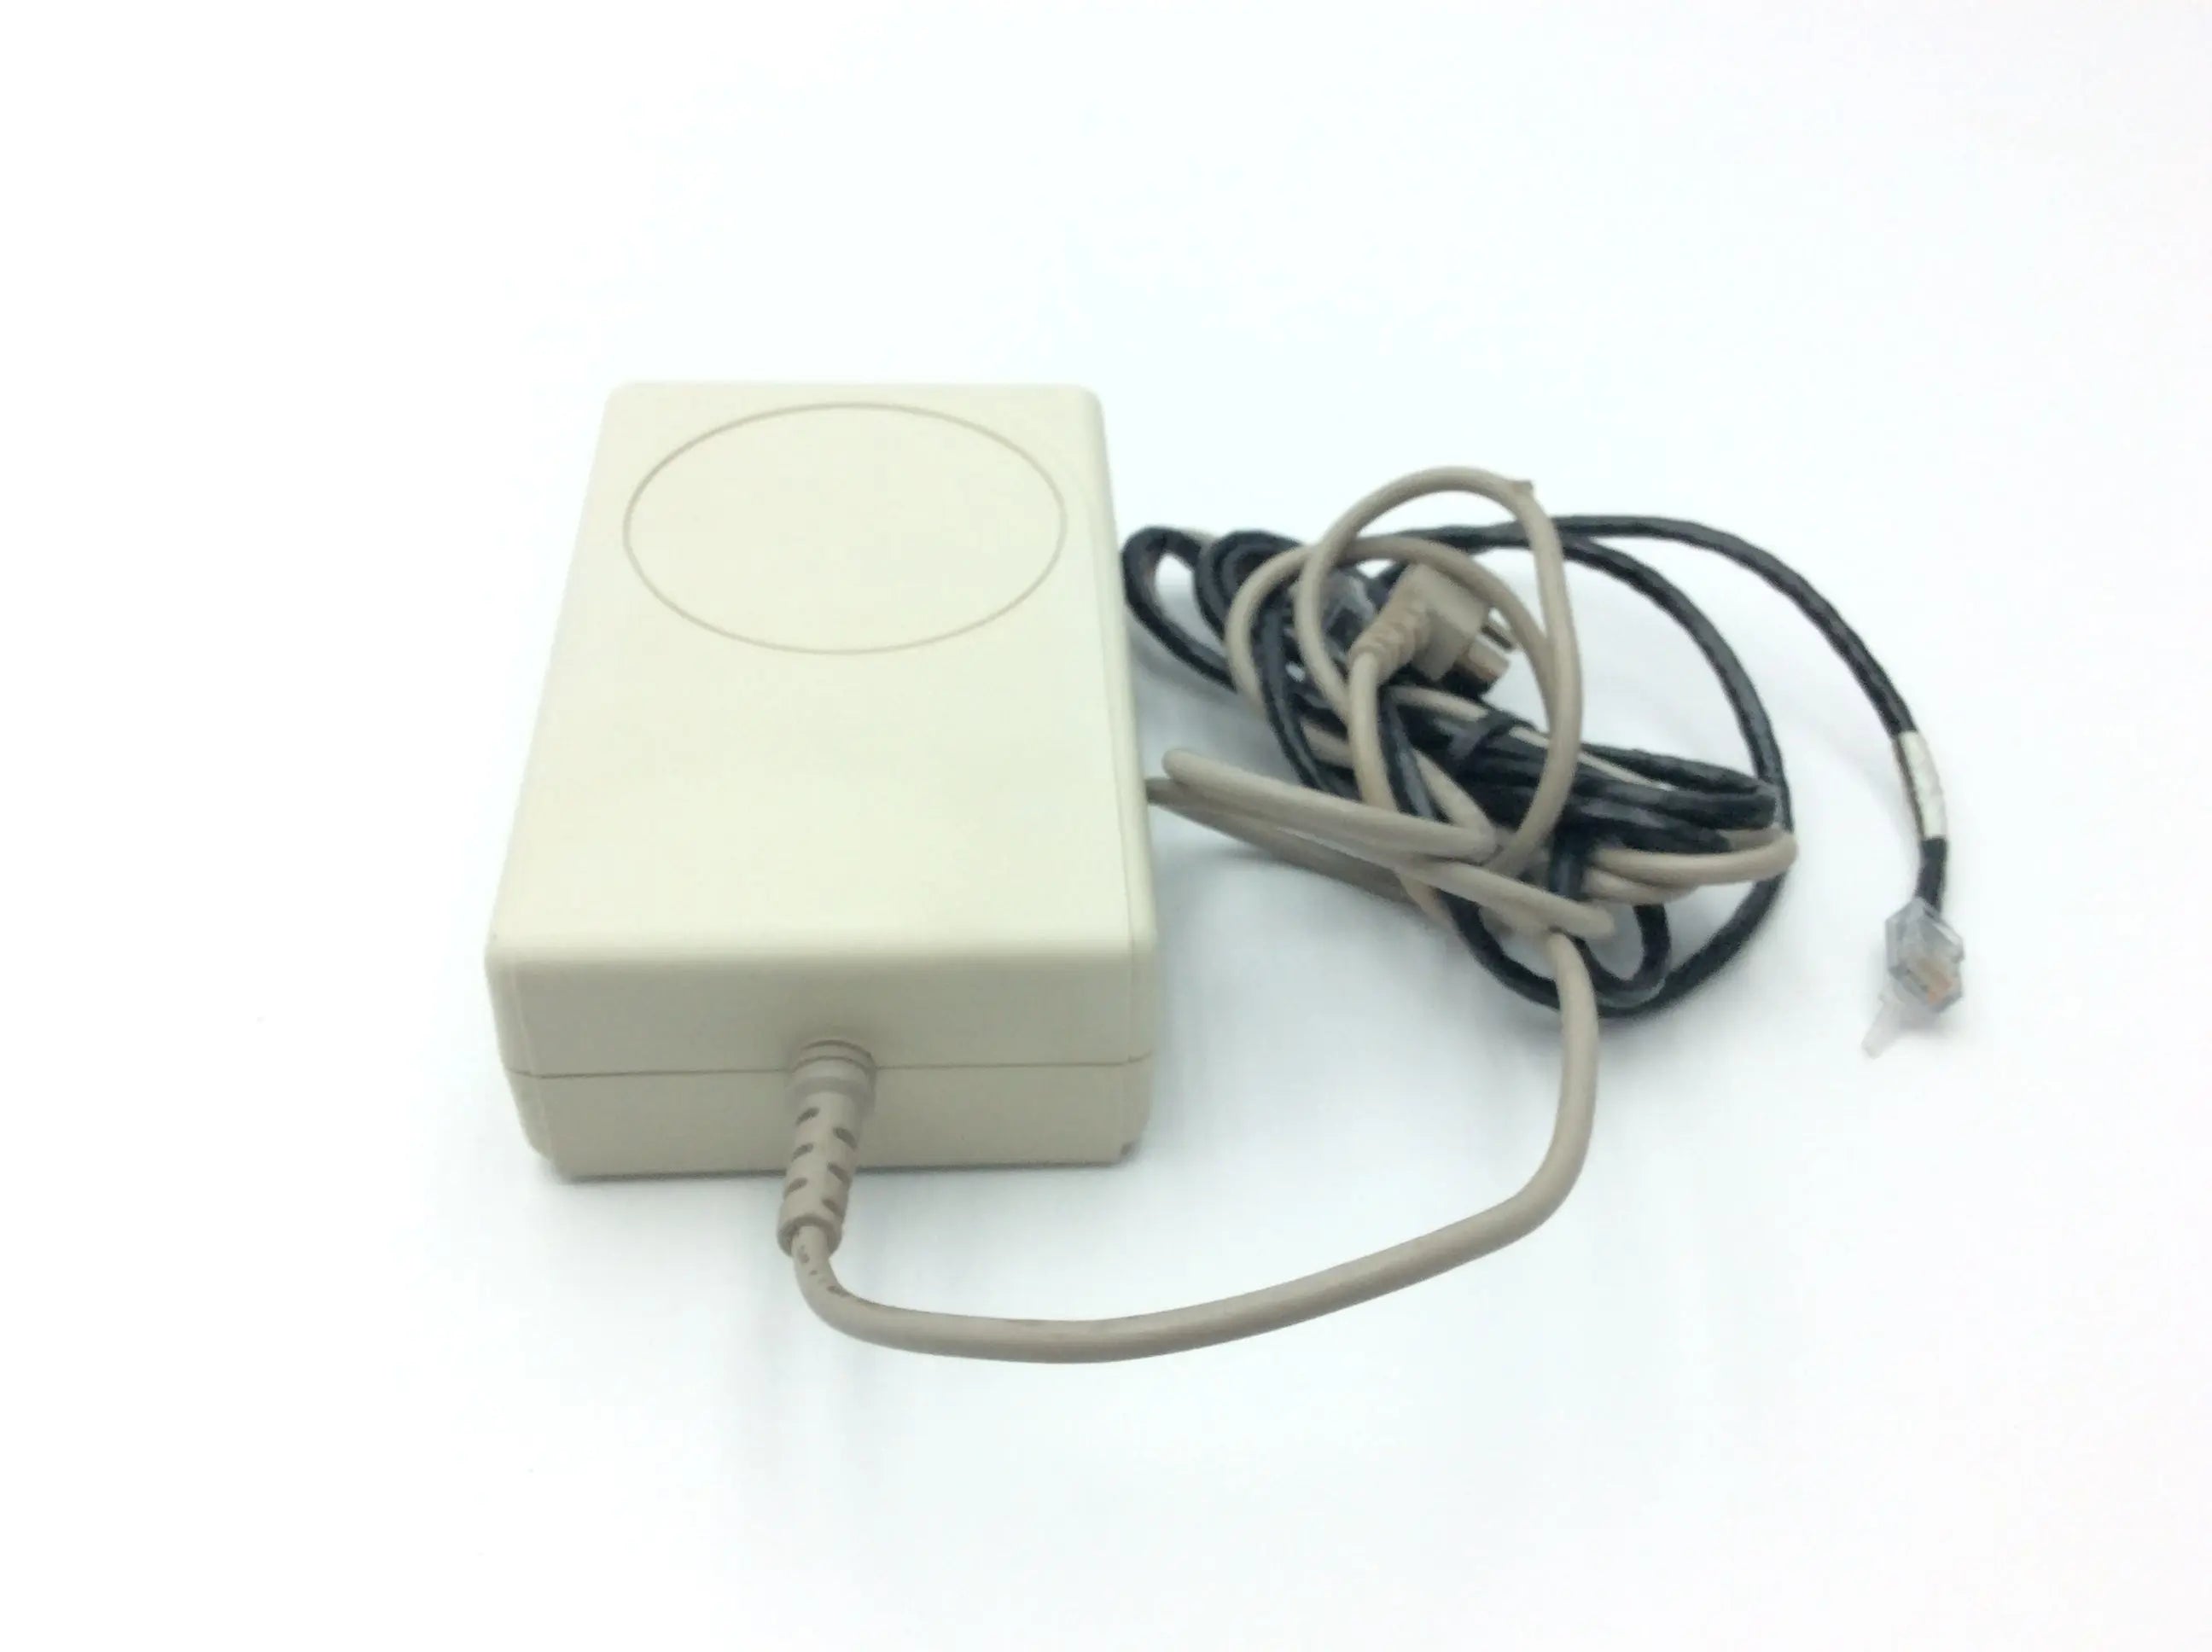 Load image into Gallery viewer, A Biomedical Service SpaceLabs MW100 P/N 119-0251-00 Electro Medical Power Supply 35.00